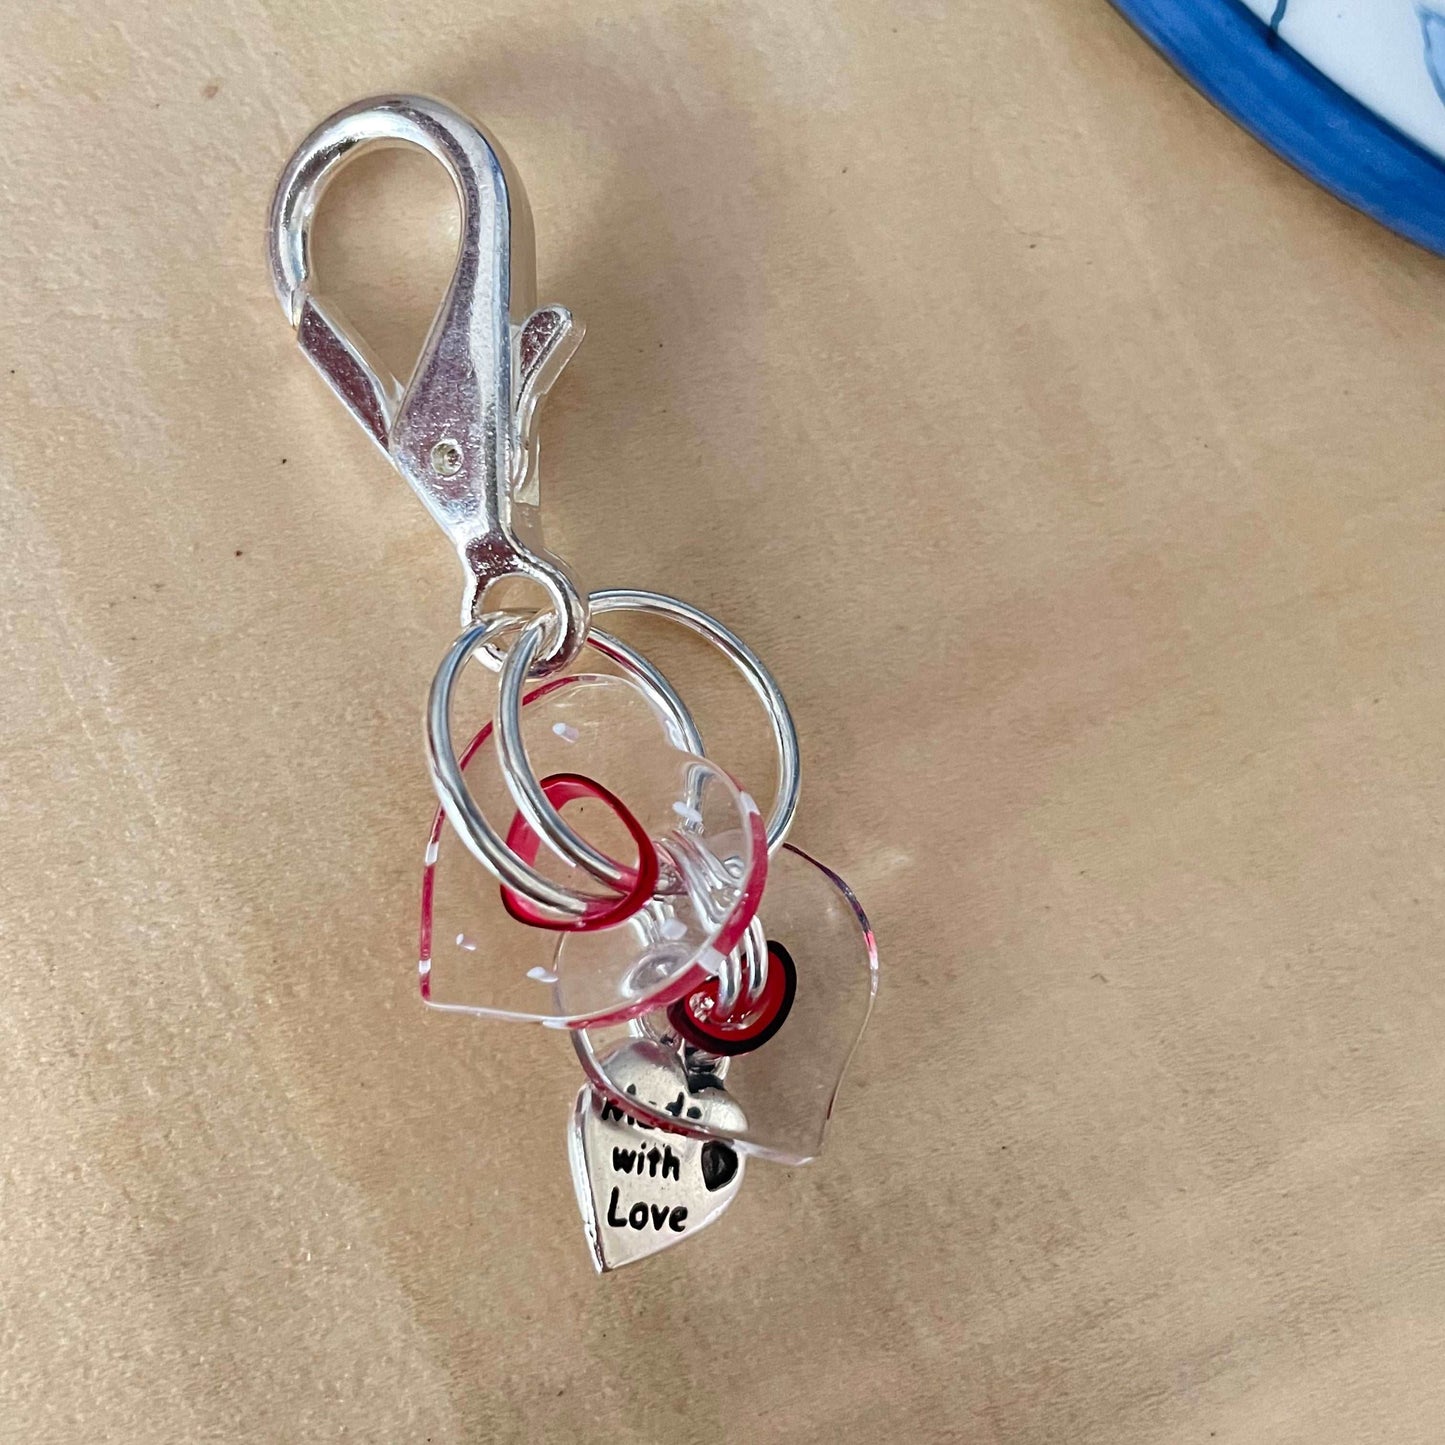 Dual Clear Cain Glass Heart Red Accent Pet Collar Charms Made With Love Cat Dog Furbaby Pet Accessory